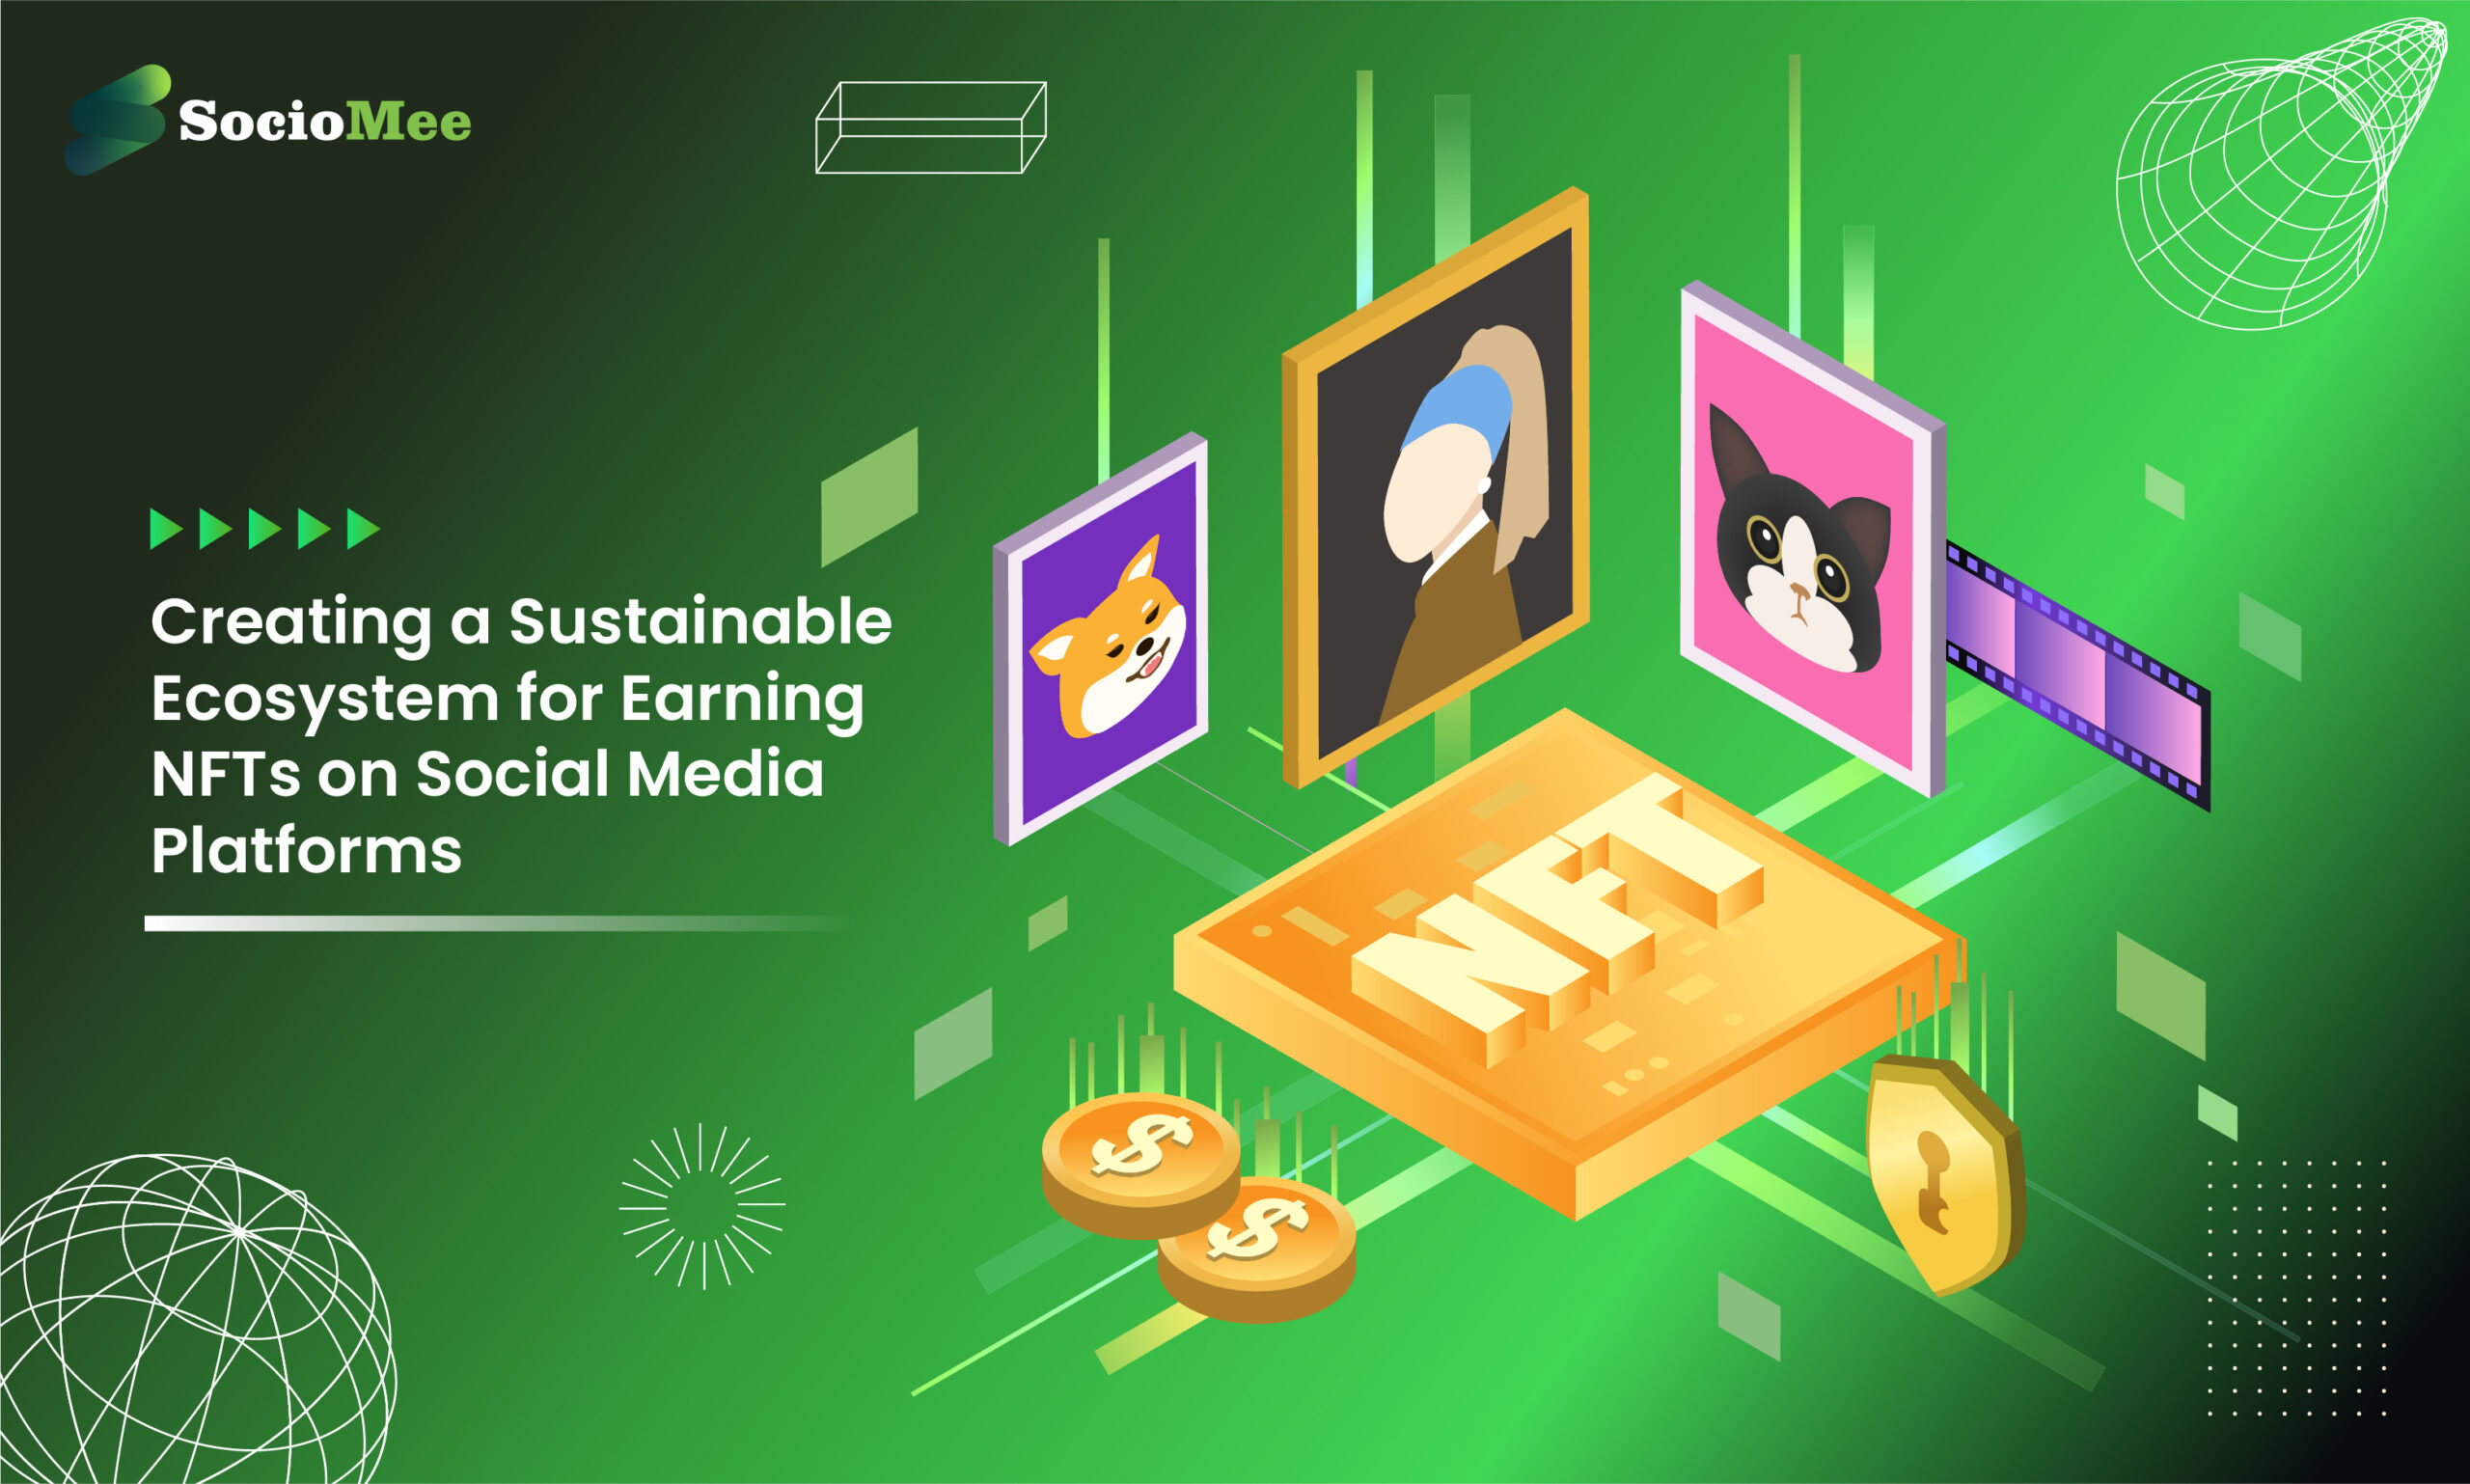 Creating a Sustainable Ecosystem for Earning NFTs on Social Media Platforms